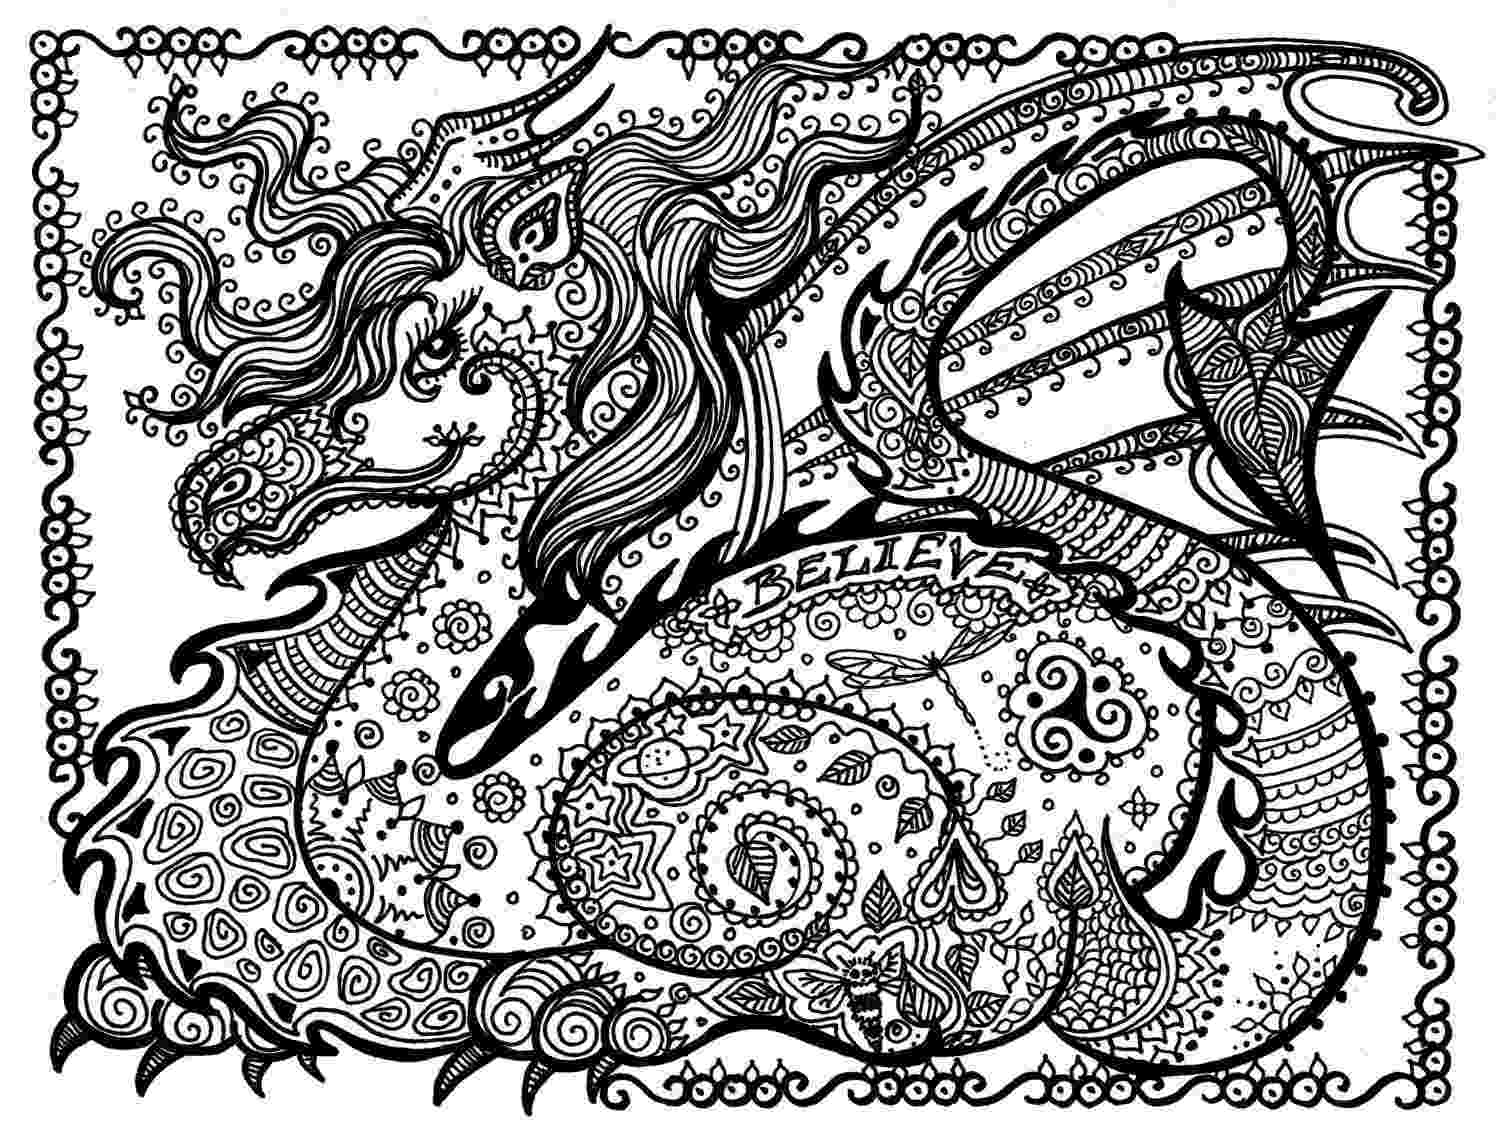 free coloring pages dragons dragon coloring pages for adults to download and print for pages coloring dragons free 